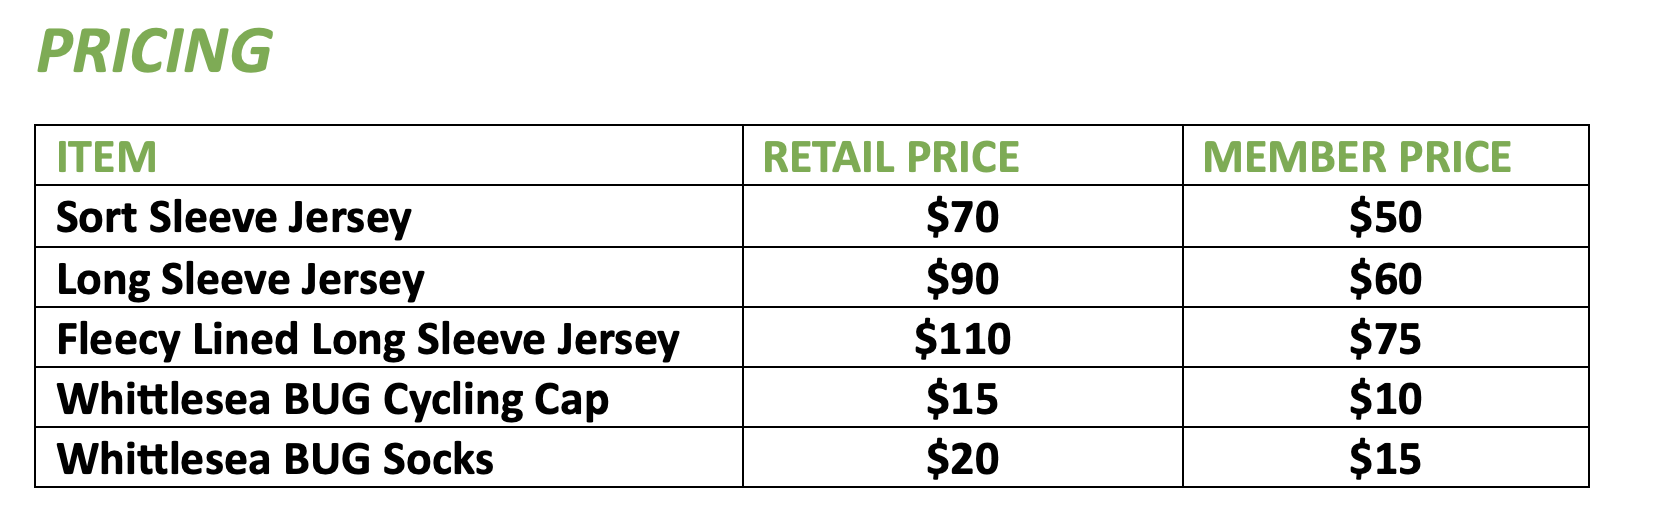 Multi-line table of prices for clothing items